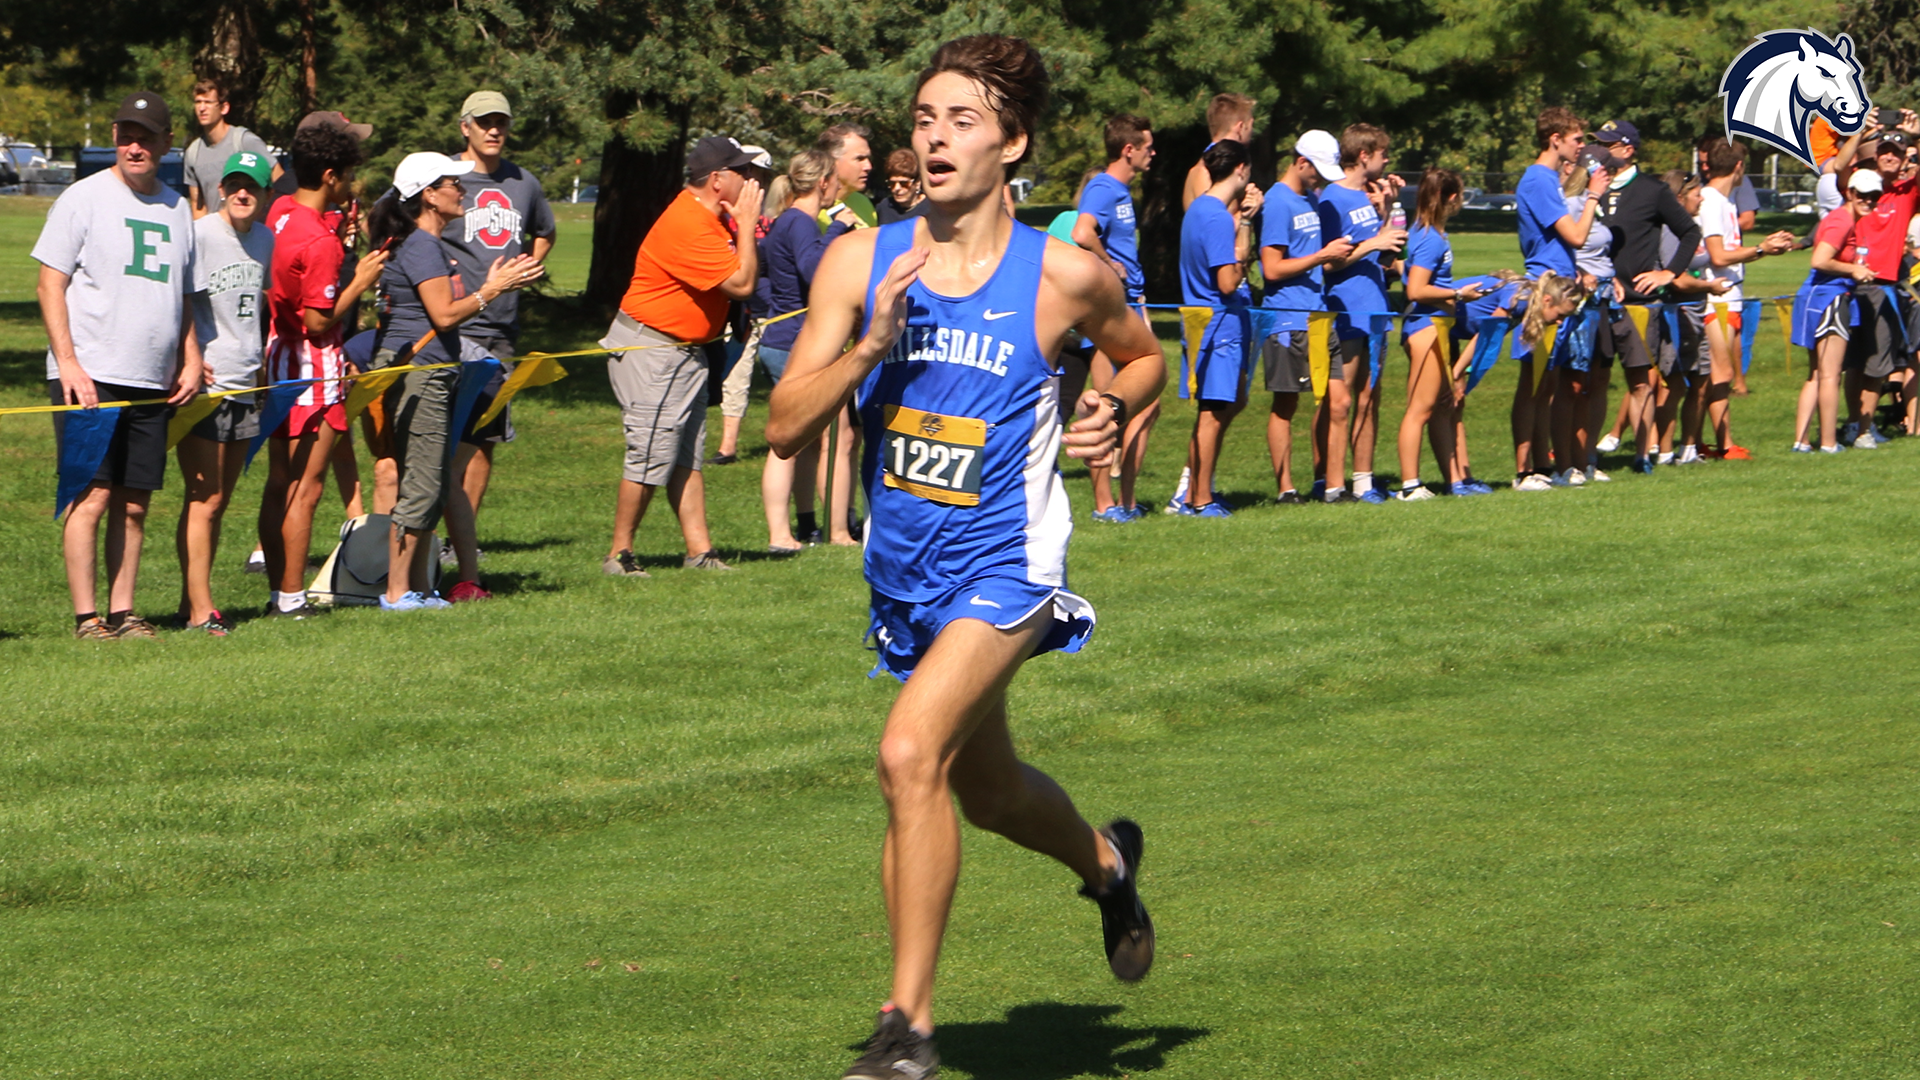 Charger men take third at competitive Calvin Invitational